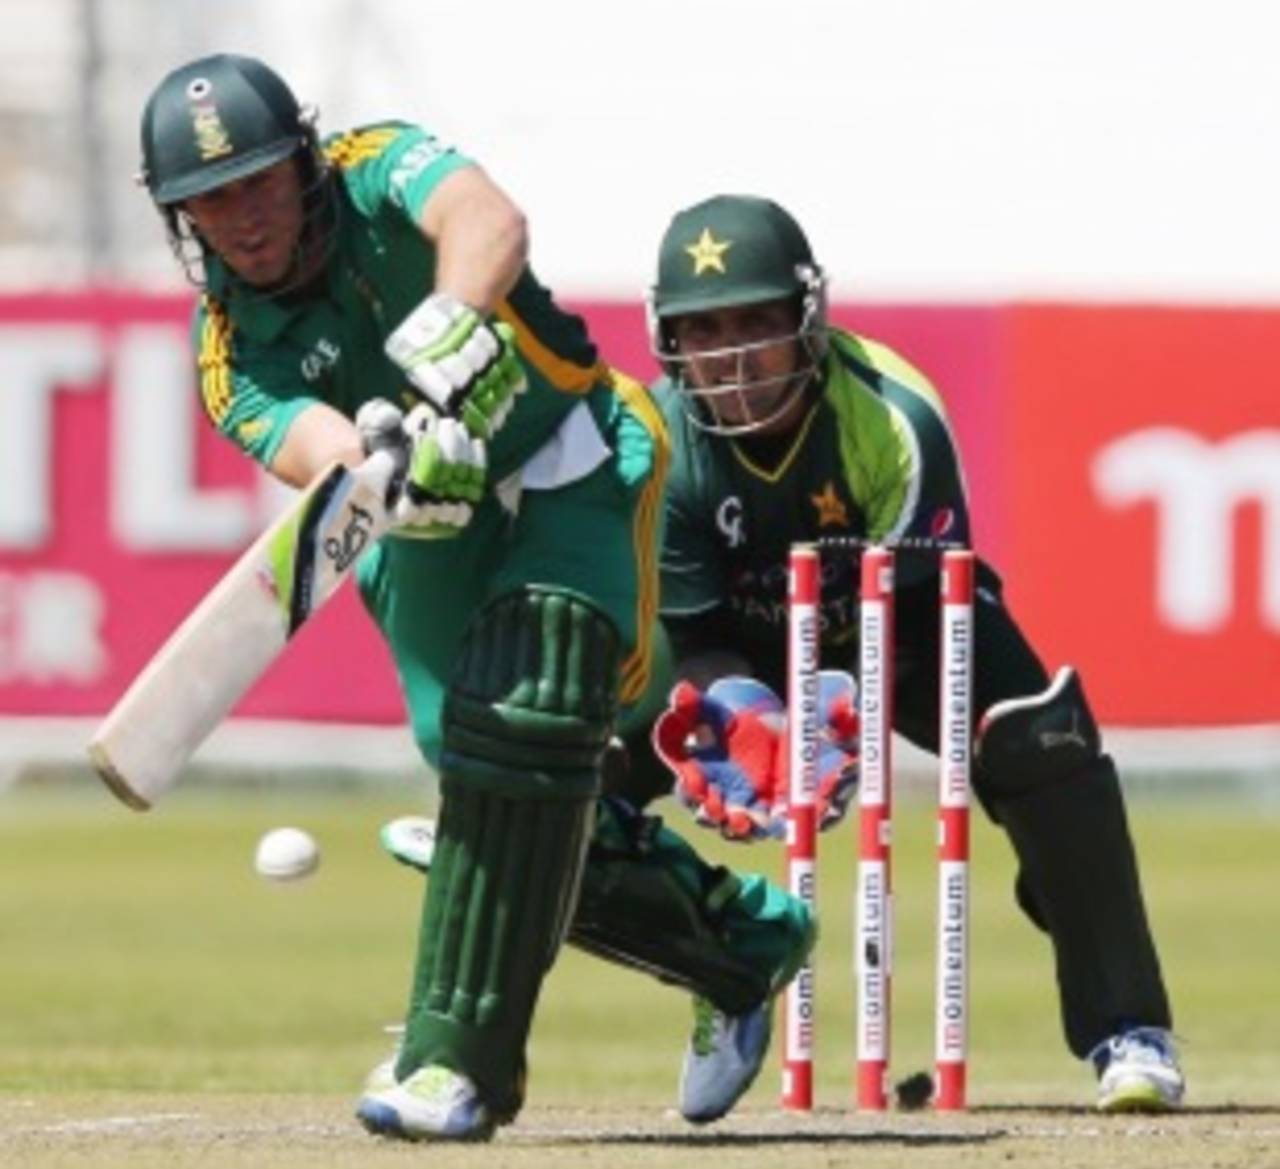 AB de Villiers pushes one through the leg side, South Africa v Pakistan, 4th ODI, Durban, March 21, 2013